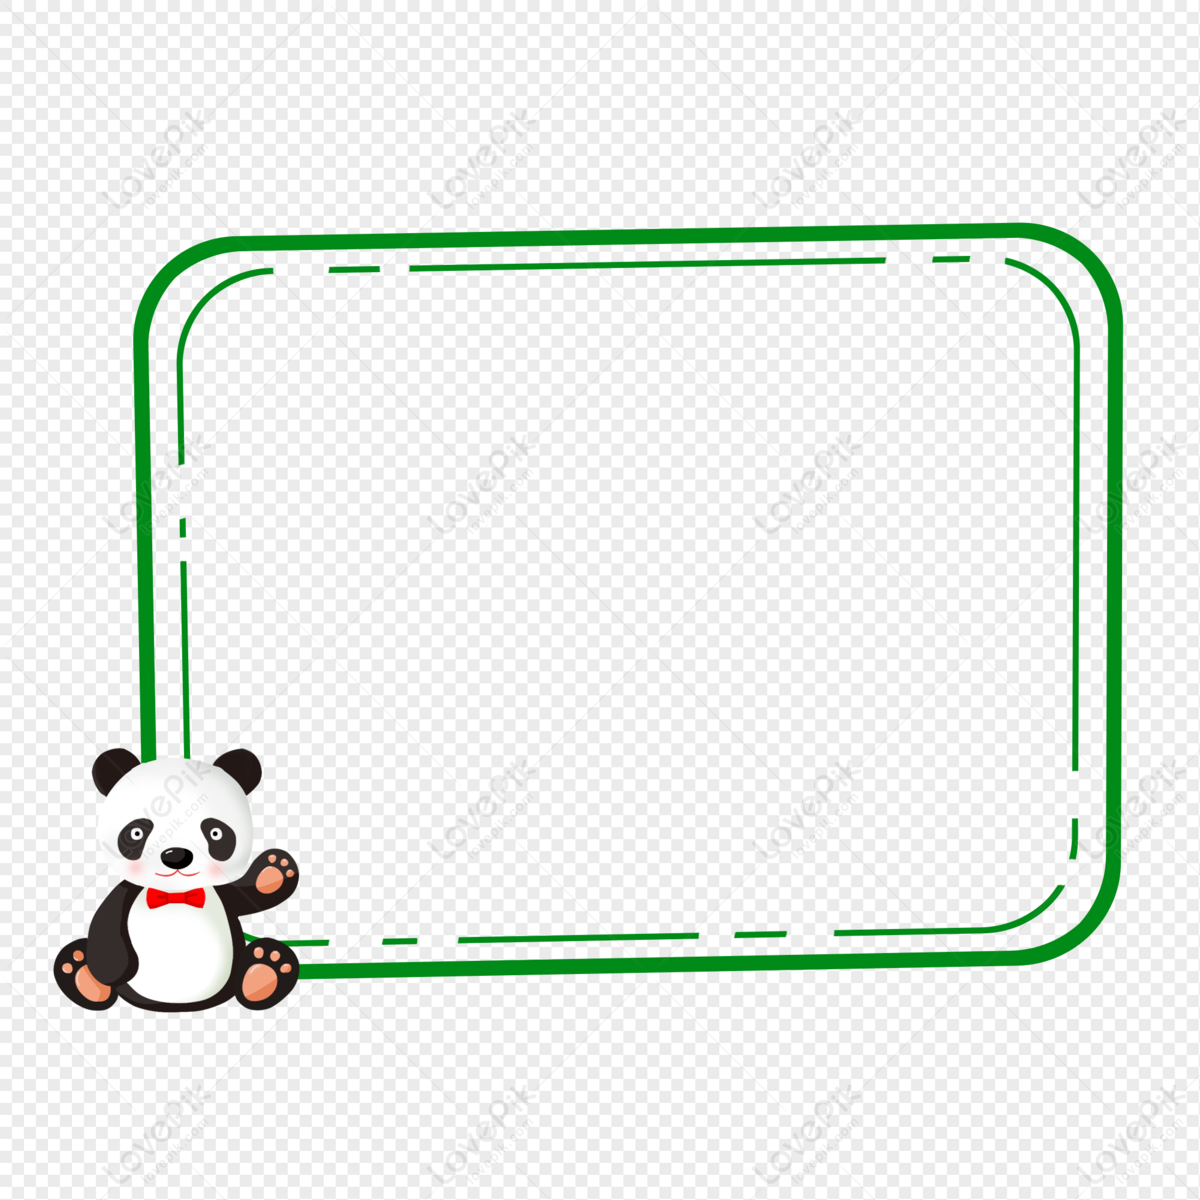 Cute Black And White Panda Border PNG Image And Clipart Image For ...